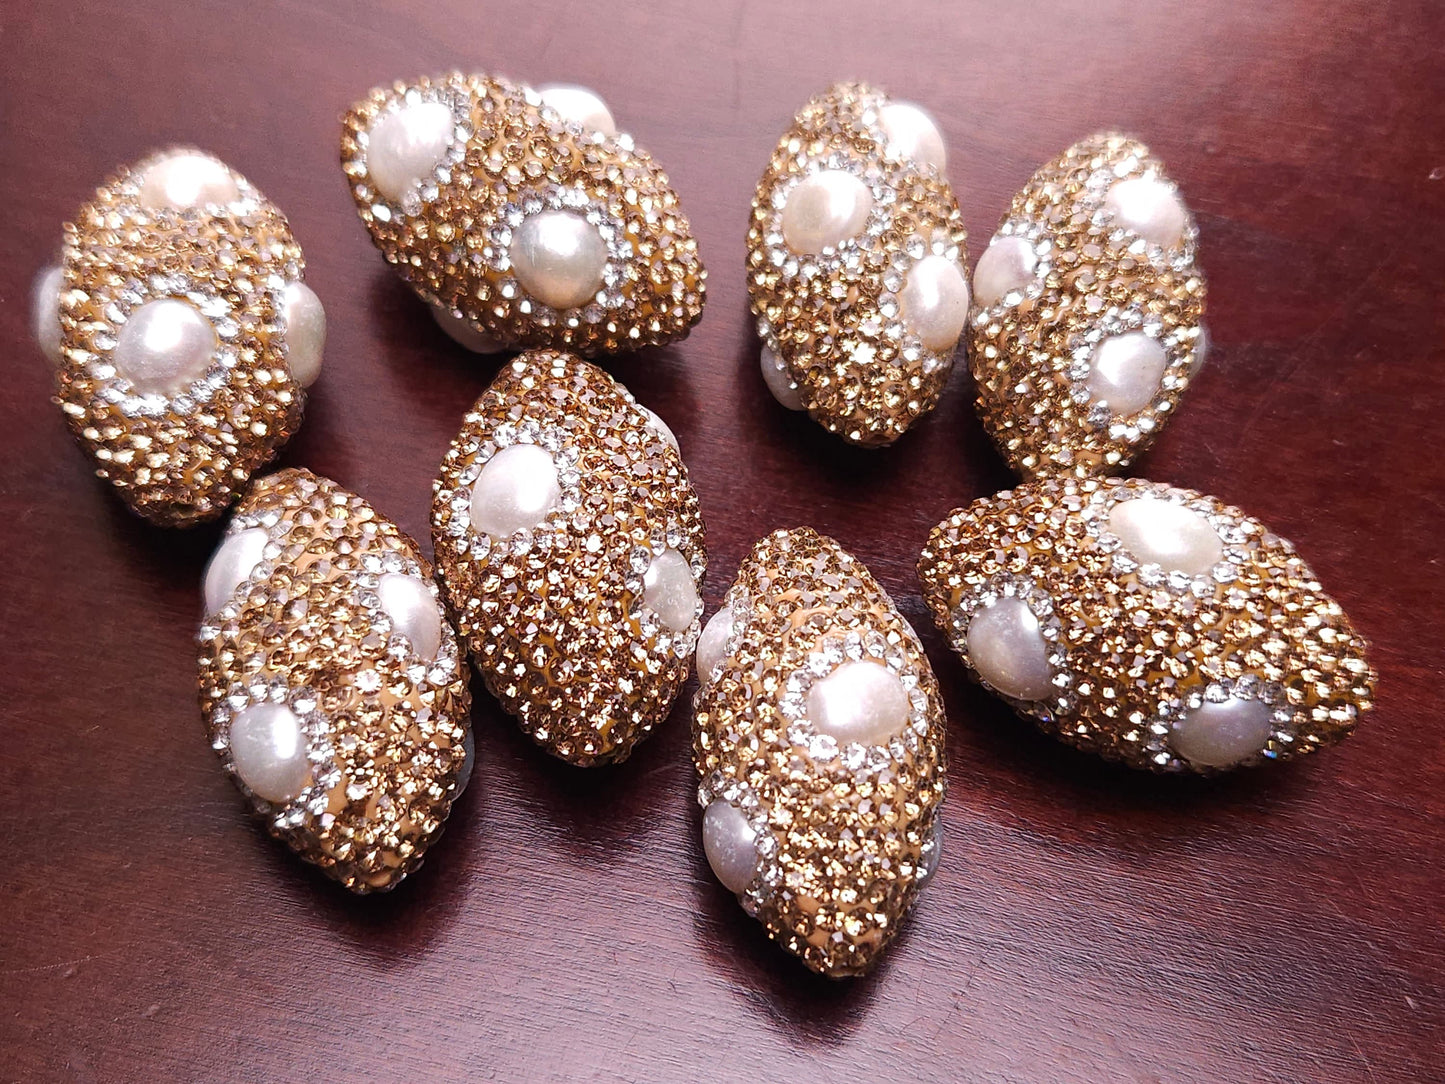 Freshwater Pearl with Gold Crystal Pave Rhinestone Handmade Fancy Focal Bead, 18x30mm, 1 pc, Jewelry Making Bling Bead